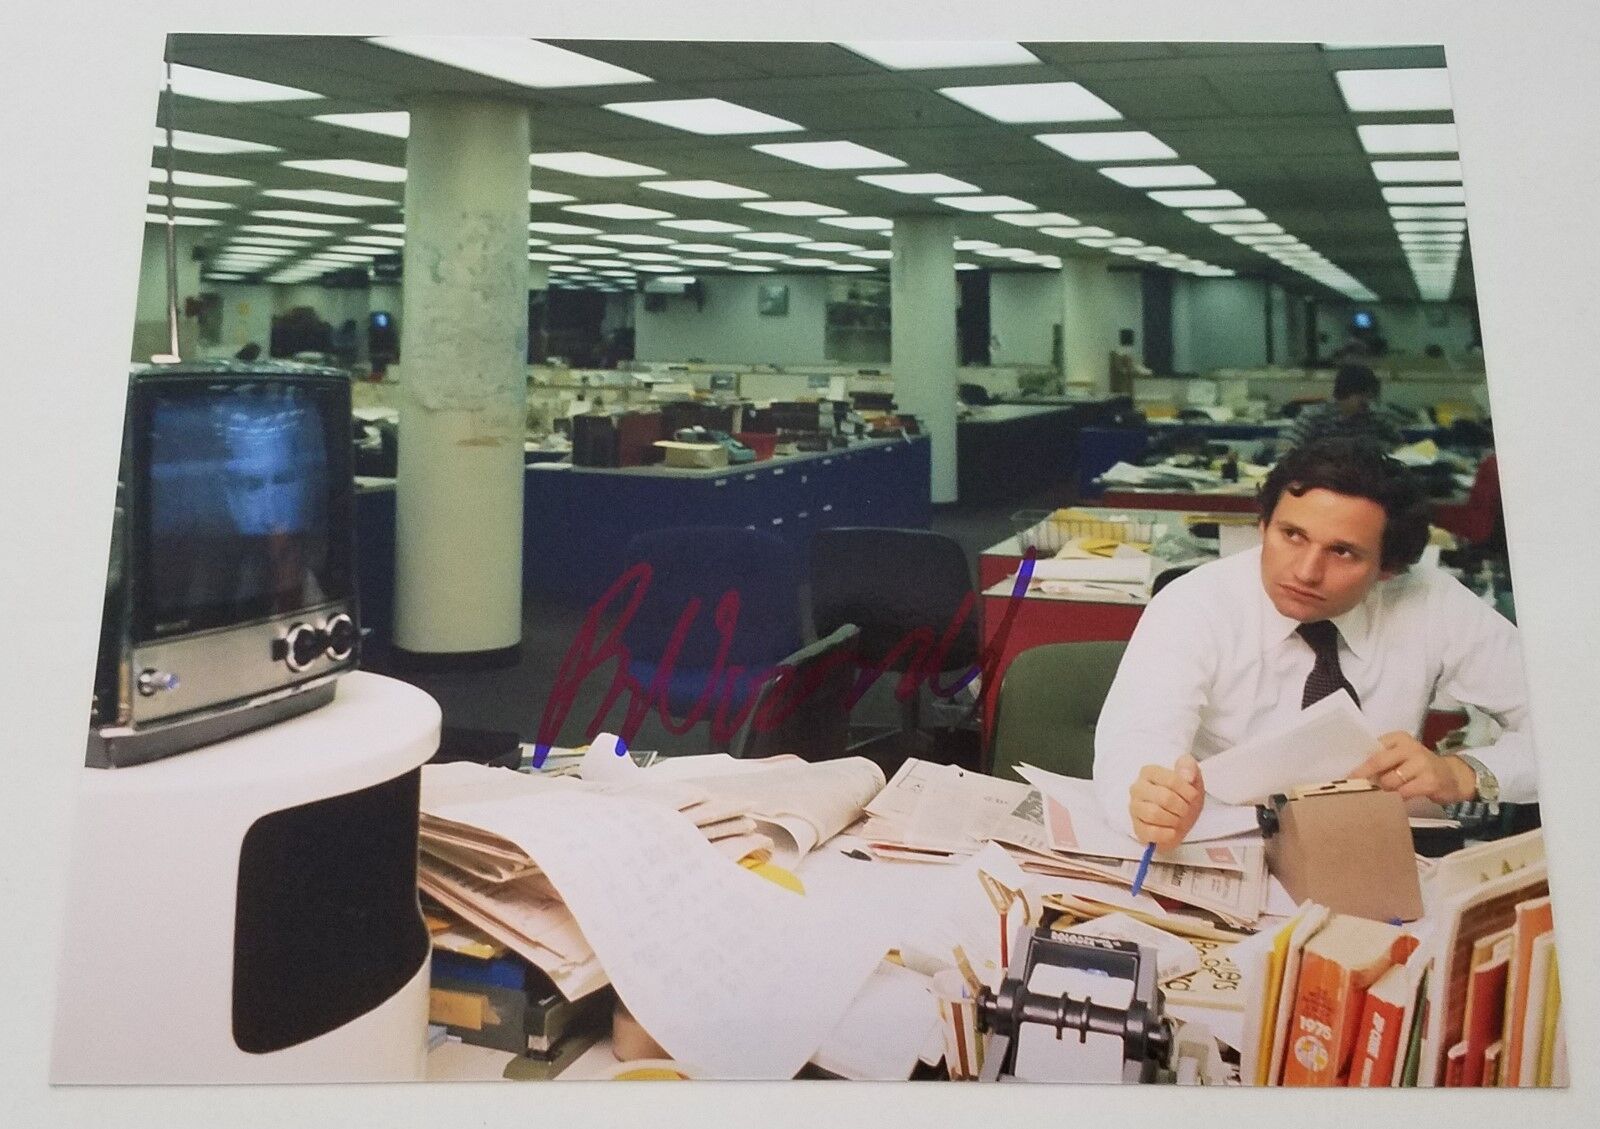 Bob Woodward Signed 8x10 Metallic Photo Poster painting Watergate Journalist Reporter Author RAD